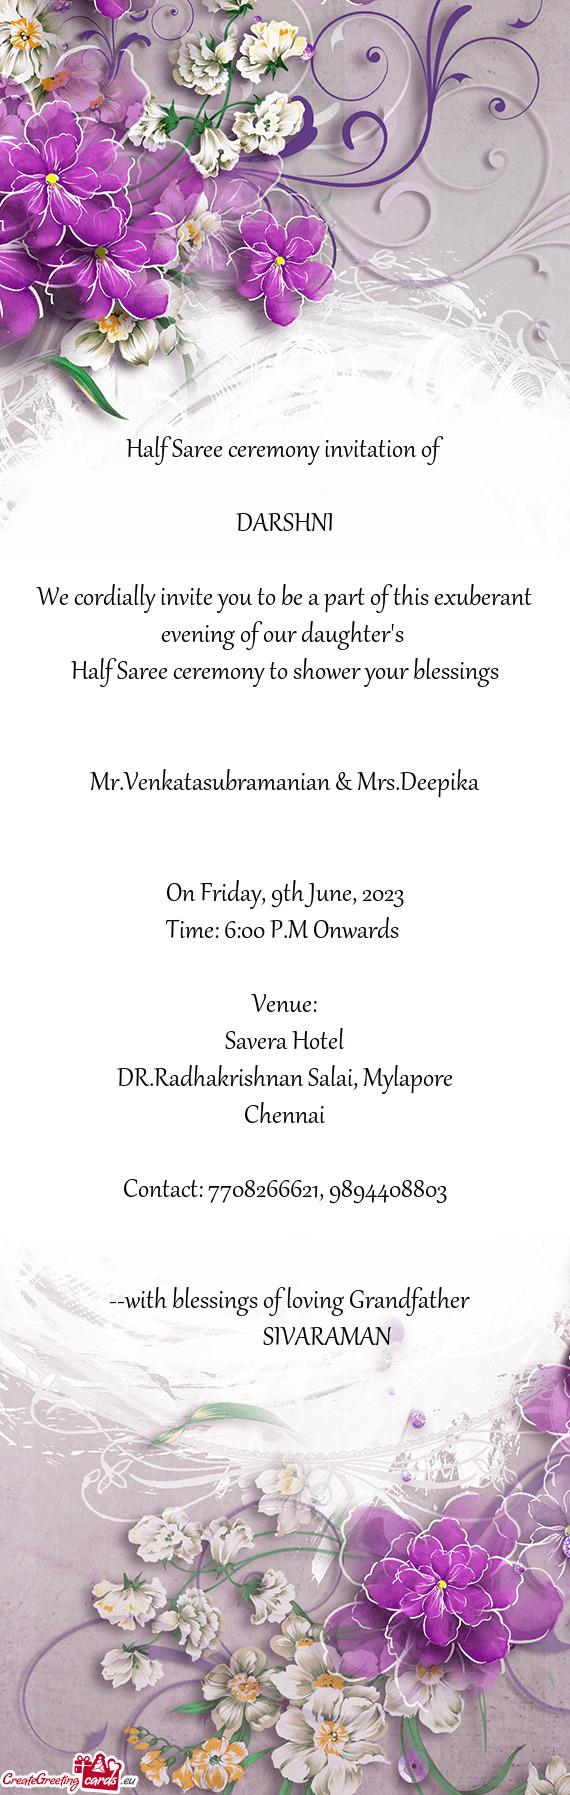 We cordially invite you to be a part of this exuberant evening of our daughter's